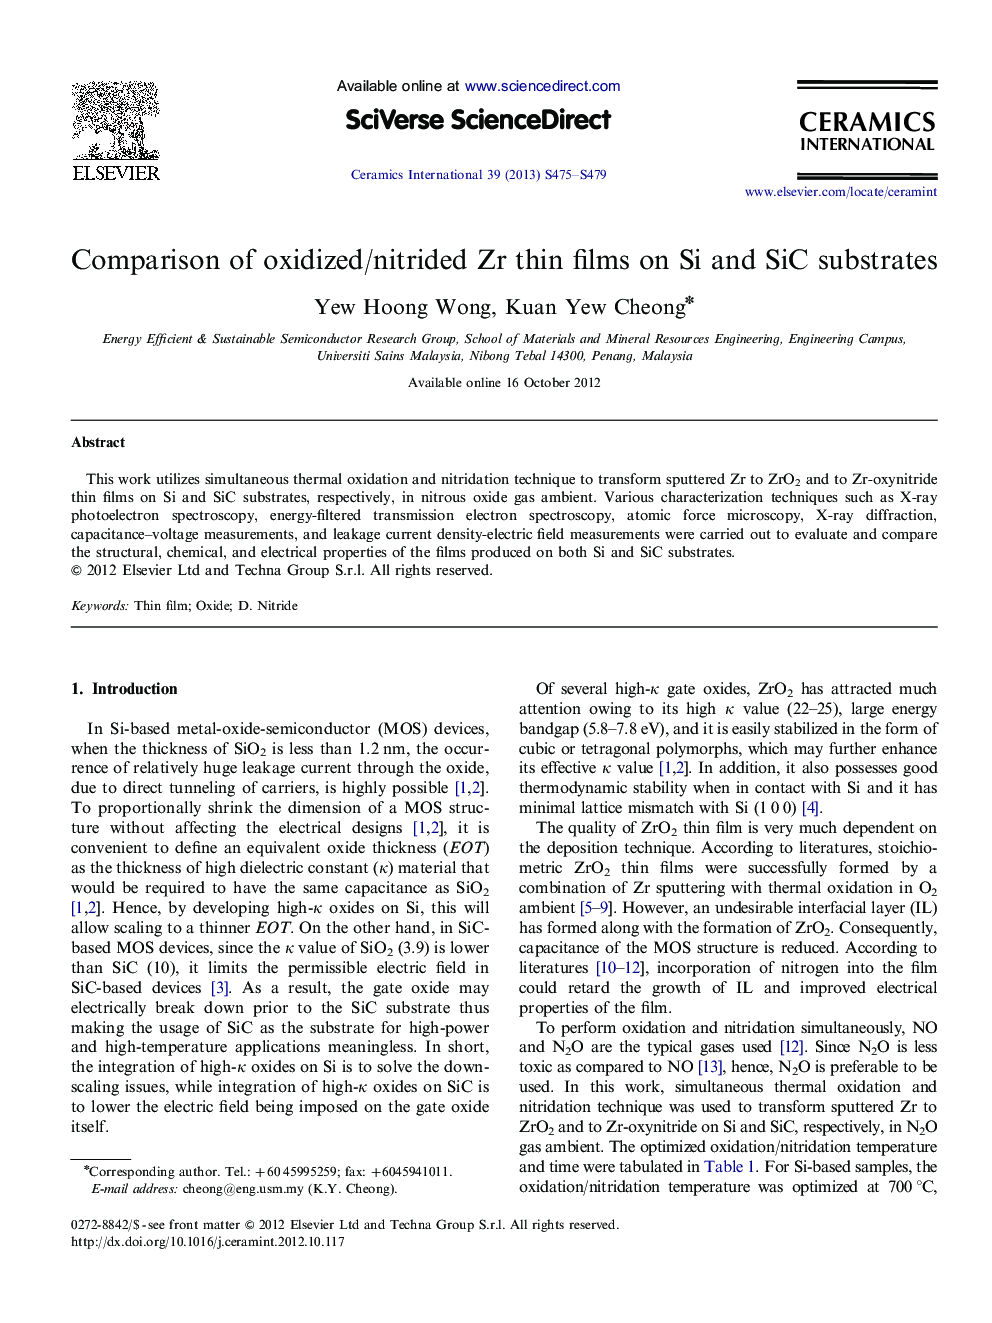 Comparison of oxidized/nitrided Zr thin films on Si and SiC substrates